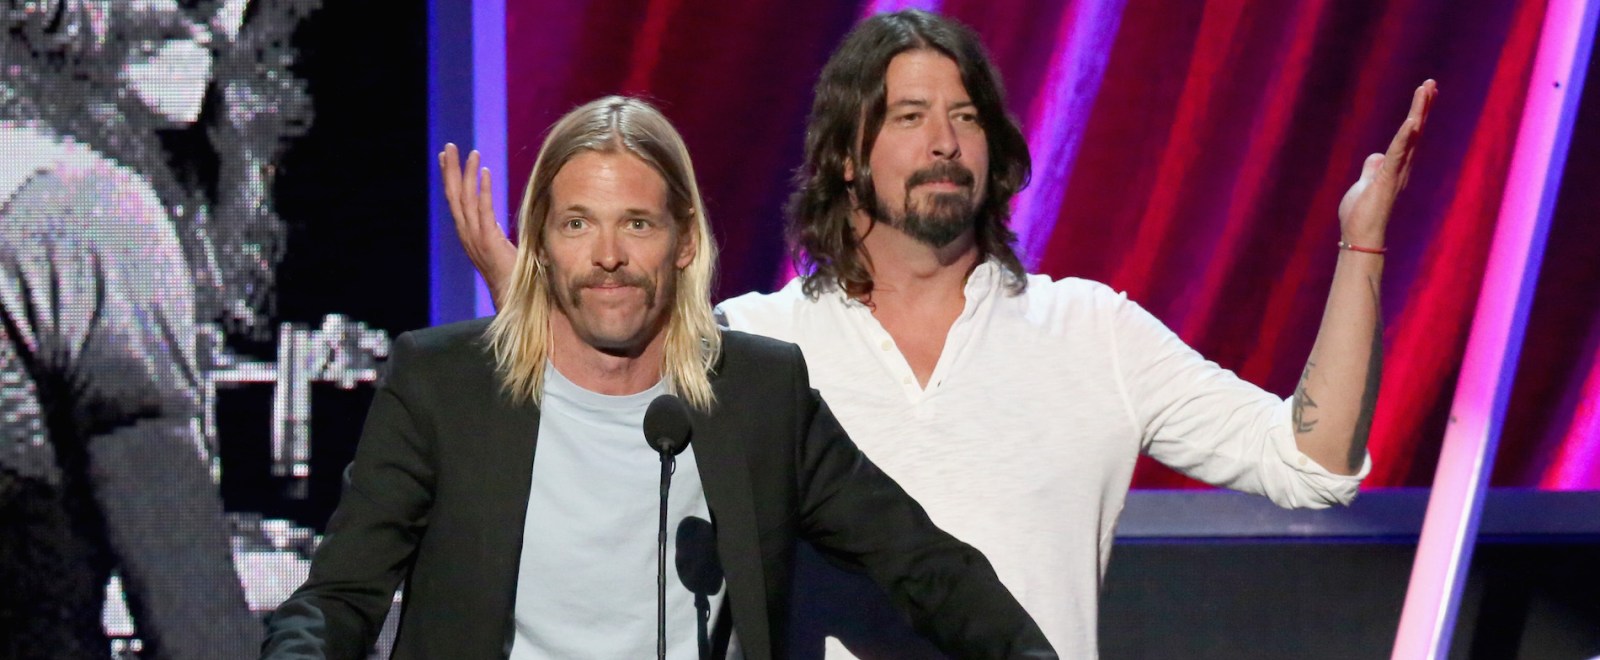 Taylor Hawkins Dave Grohl Foo Fighters 2013 Rock And Roll Hall Of Fame Induction Ceremony